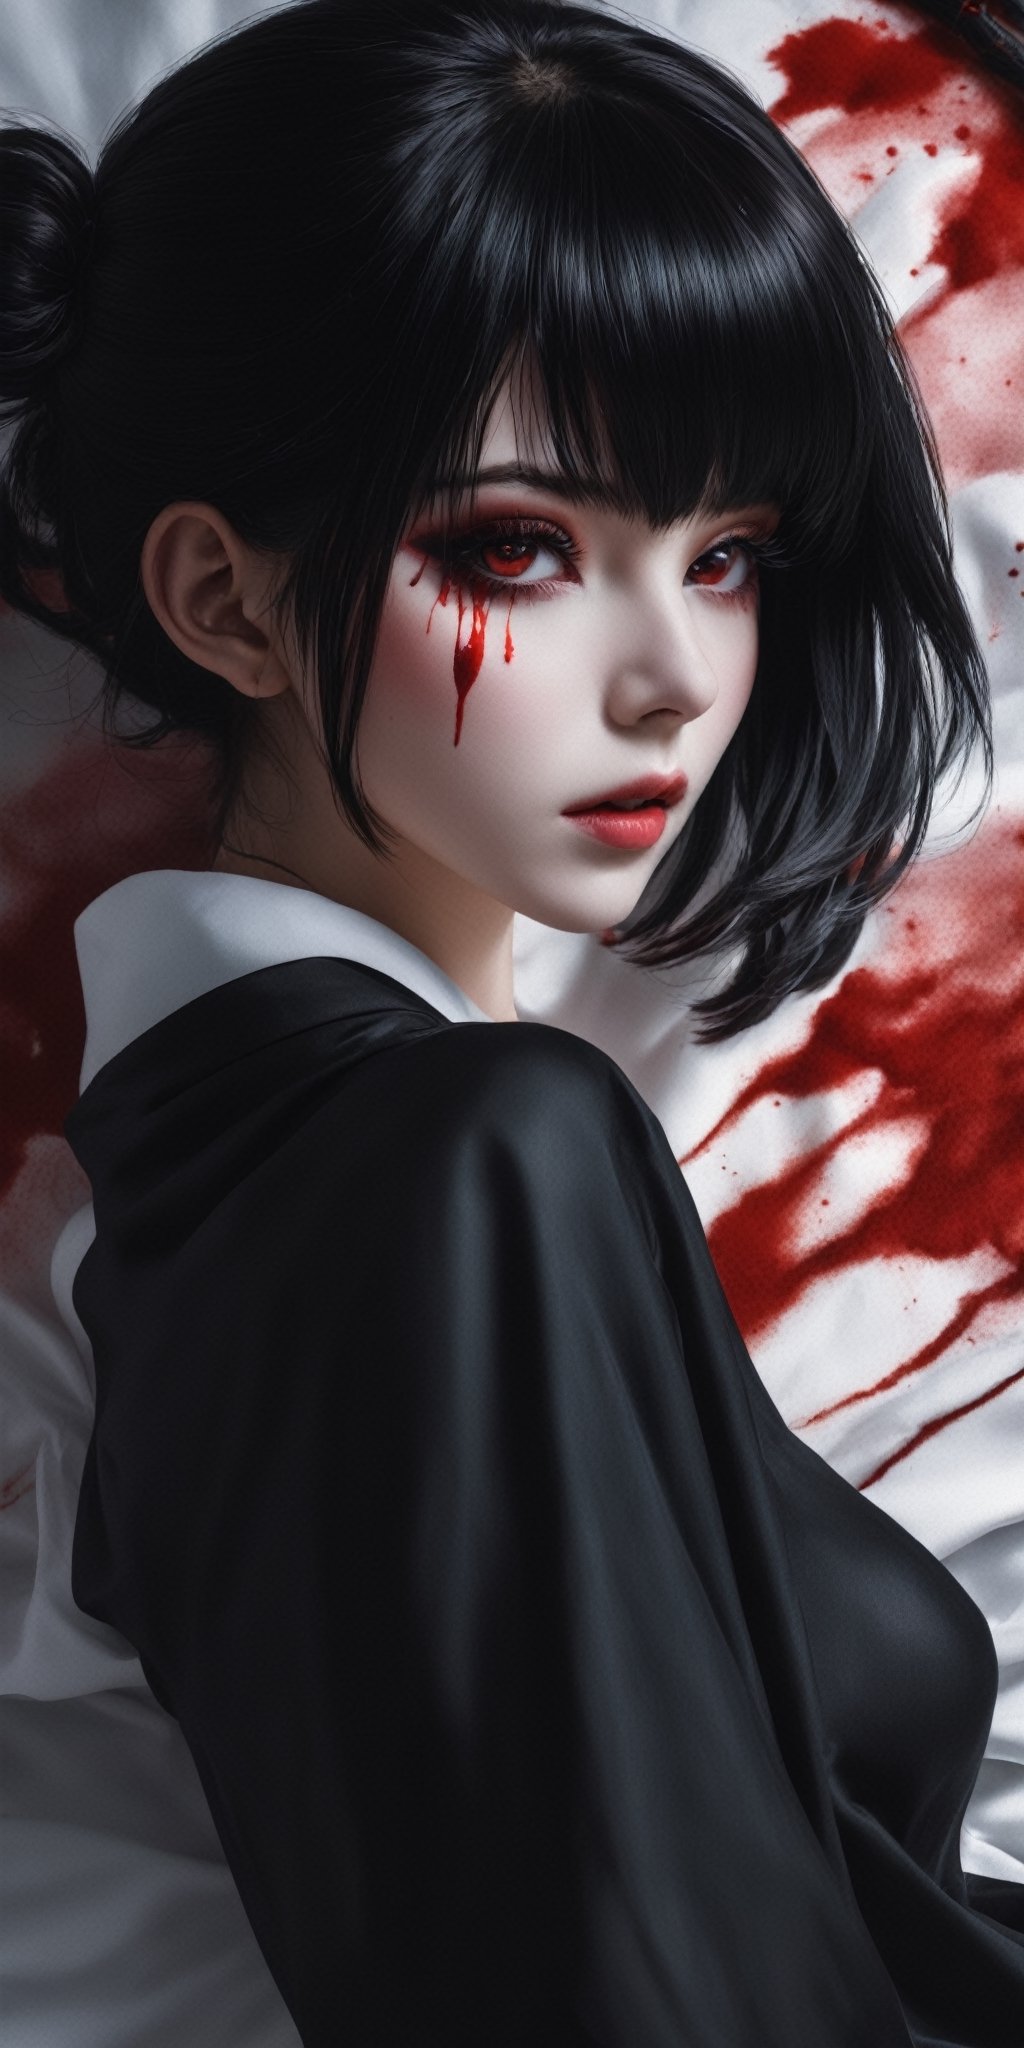 (masterpiece, high quality, 8K, high_res), (professional photoshot), cosplay style,
breathtakingly beautiful woman, black hair, bun with a knitting needle, 
pale powdered face, red contact lenses, gore-like makeup, lying on a white sheet with blood stains, black underwear, top view, inspired by the anime Tokyo Ghoul and photography by Alasdair McLellan,
ultra detailed, dark, cruel, elegant, fashion, seductive, aesthetic, full lenght view
,Leonardo Style,fflixmj6